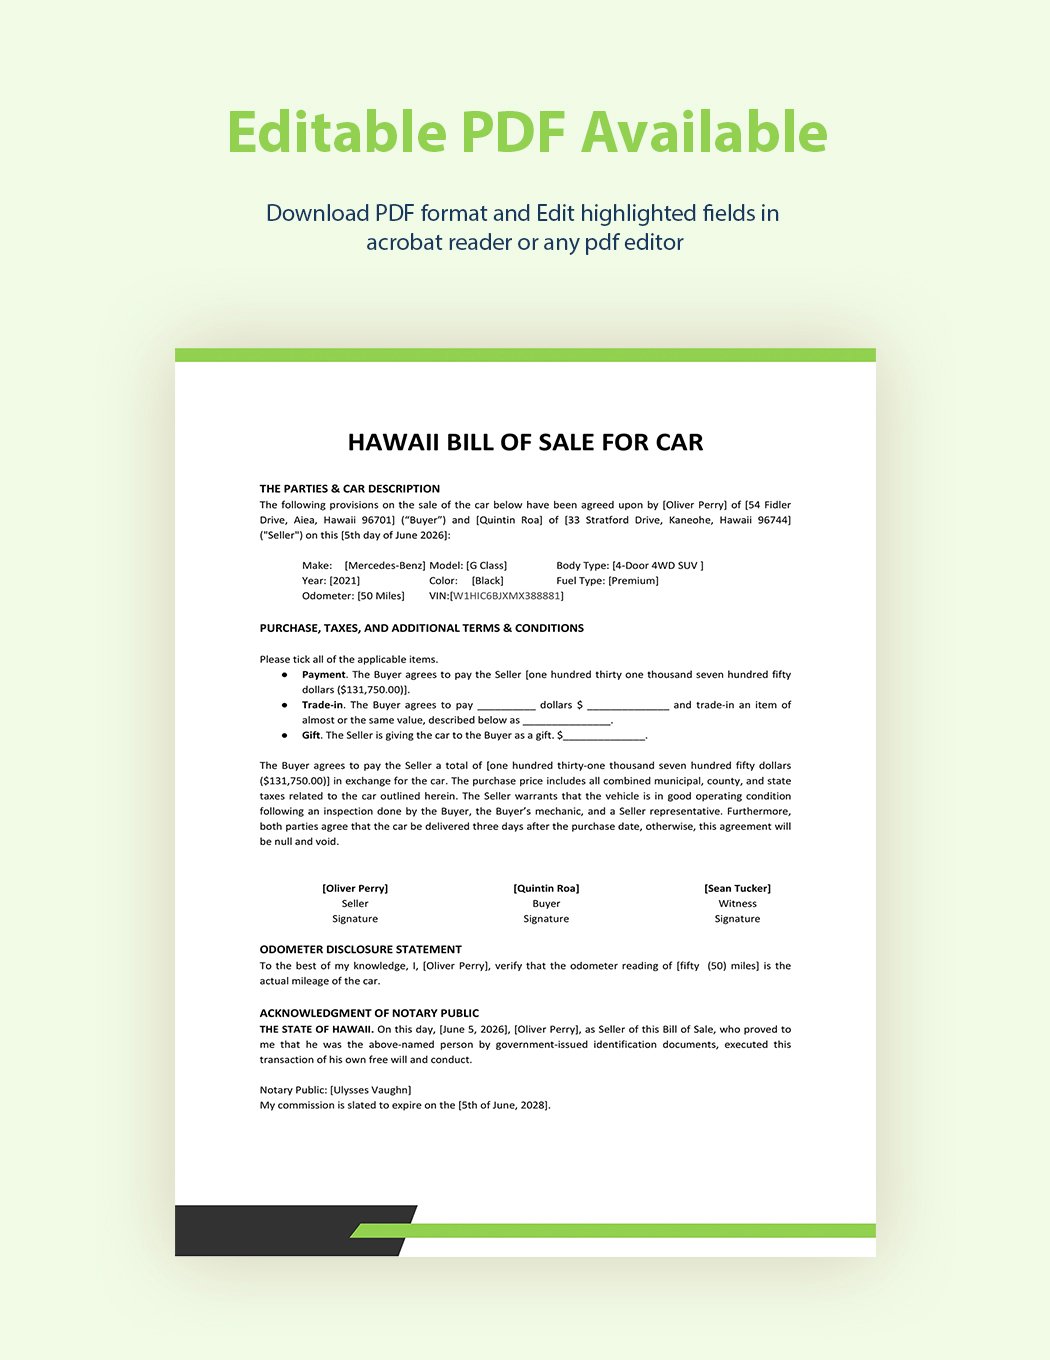 Hawaii Bill of Sale For Car Template in PDF Word Google Docs